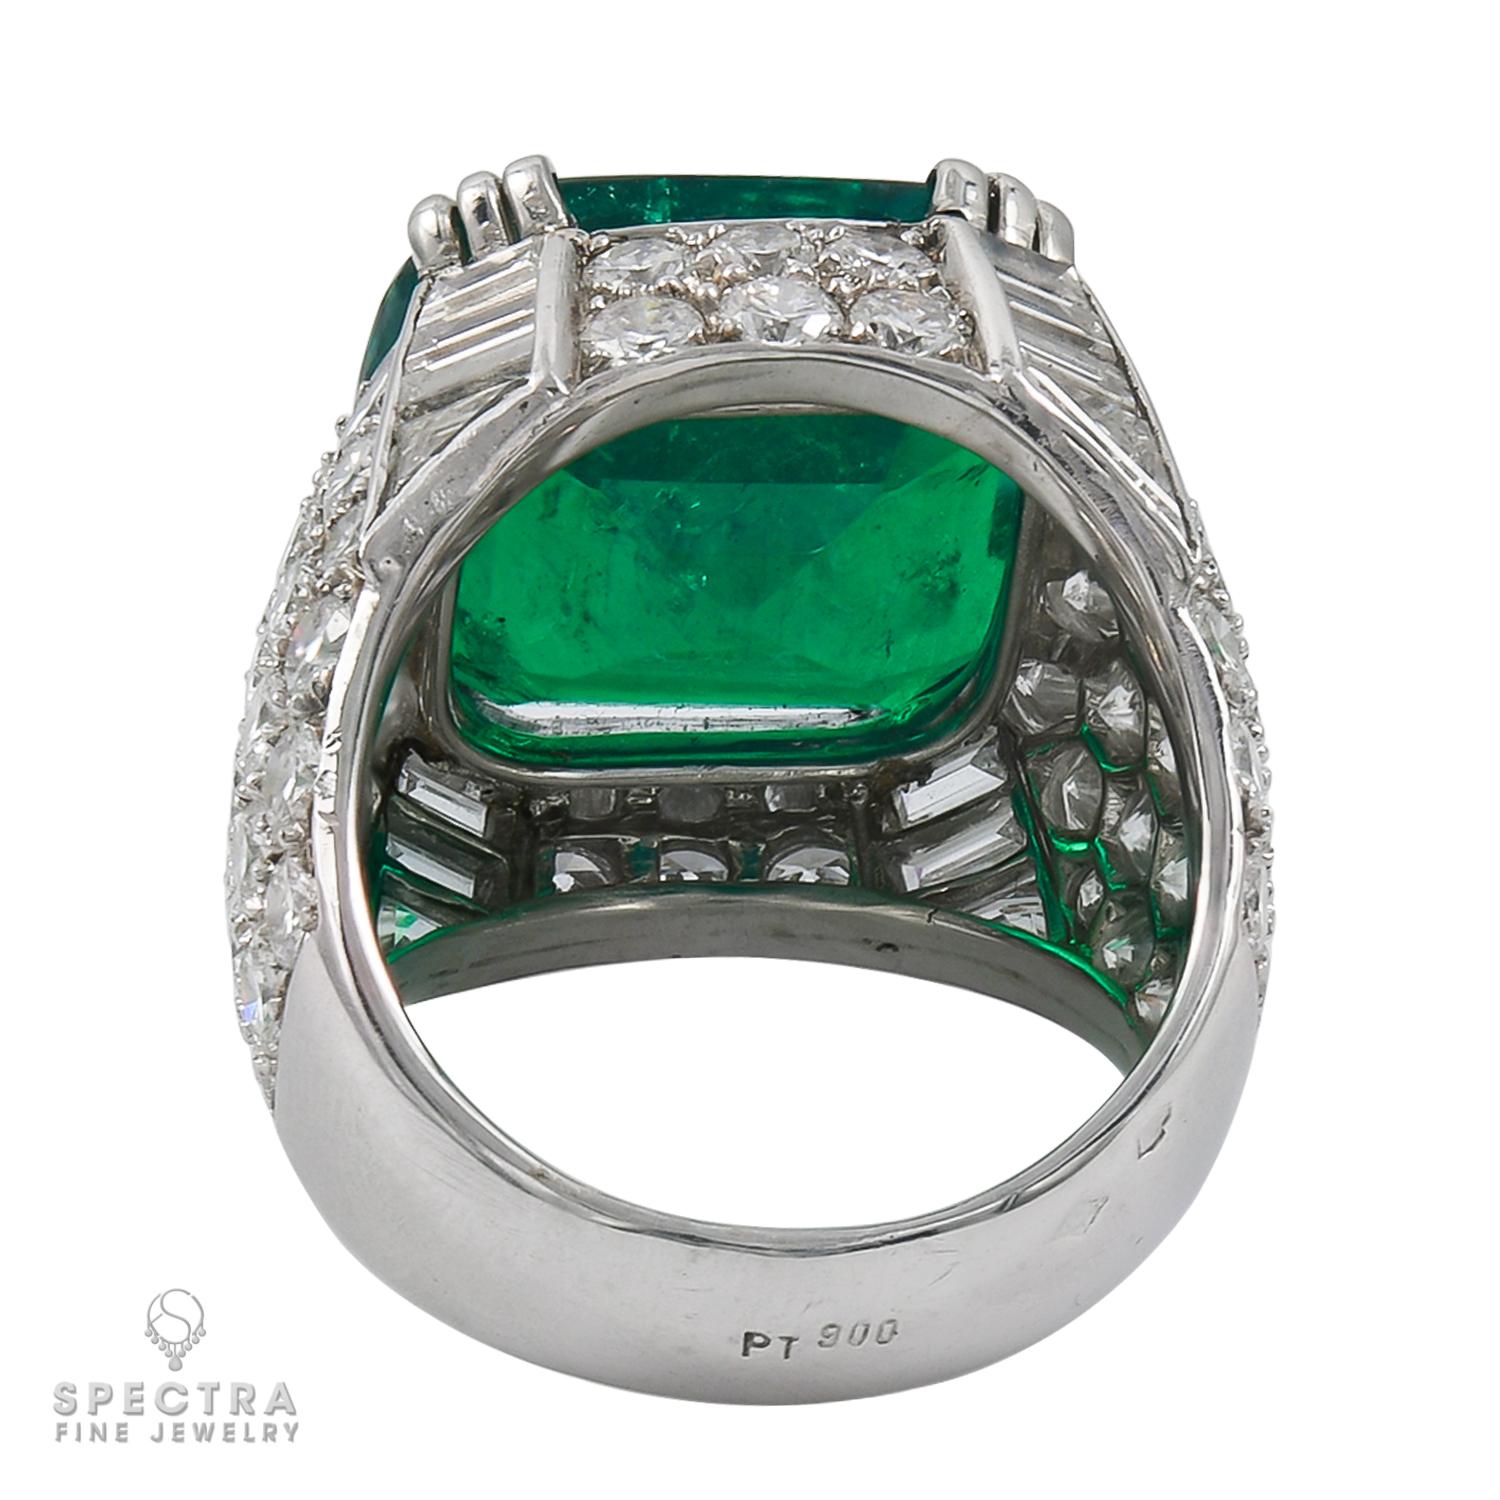 Contemporary Spectra Fine Jewelry AGL Certified 11.38 Carat Colombian Emerald Ring For Sale